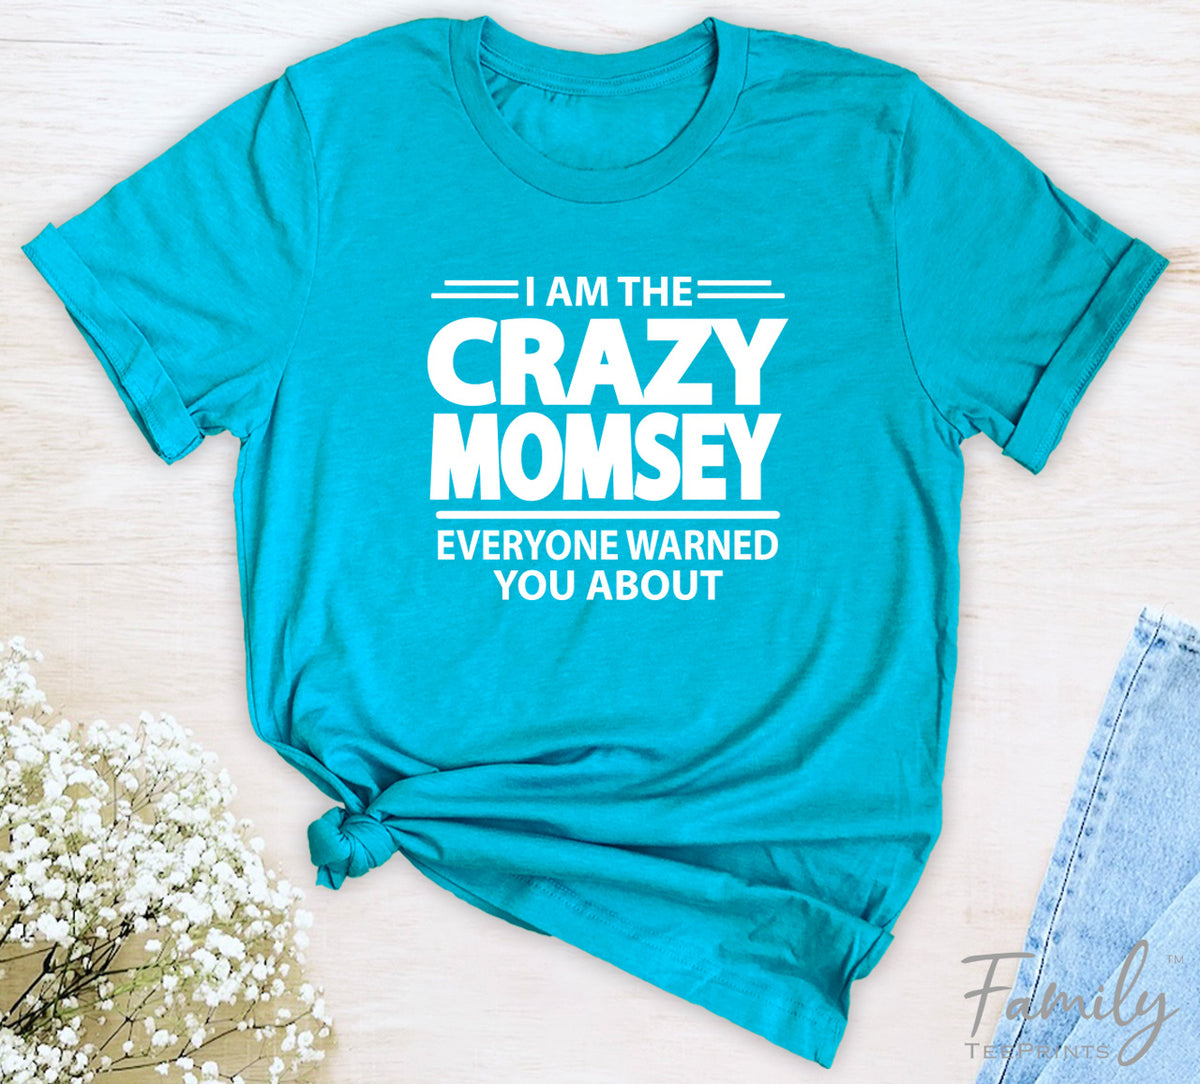 I Am The Crazy Momsey Everyone Warned You About - Unisex T-shirt - Momsey Shirt - Funny Momsey Gift - familyteeprints